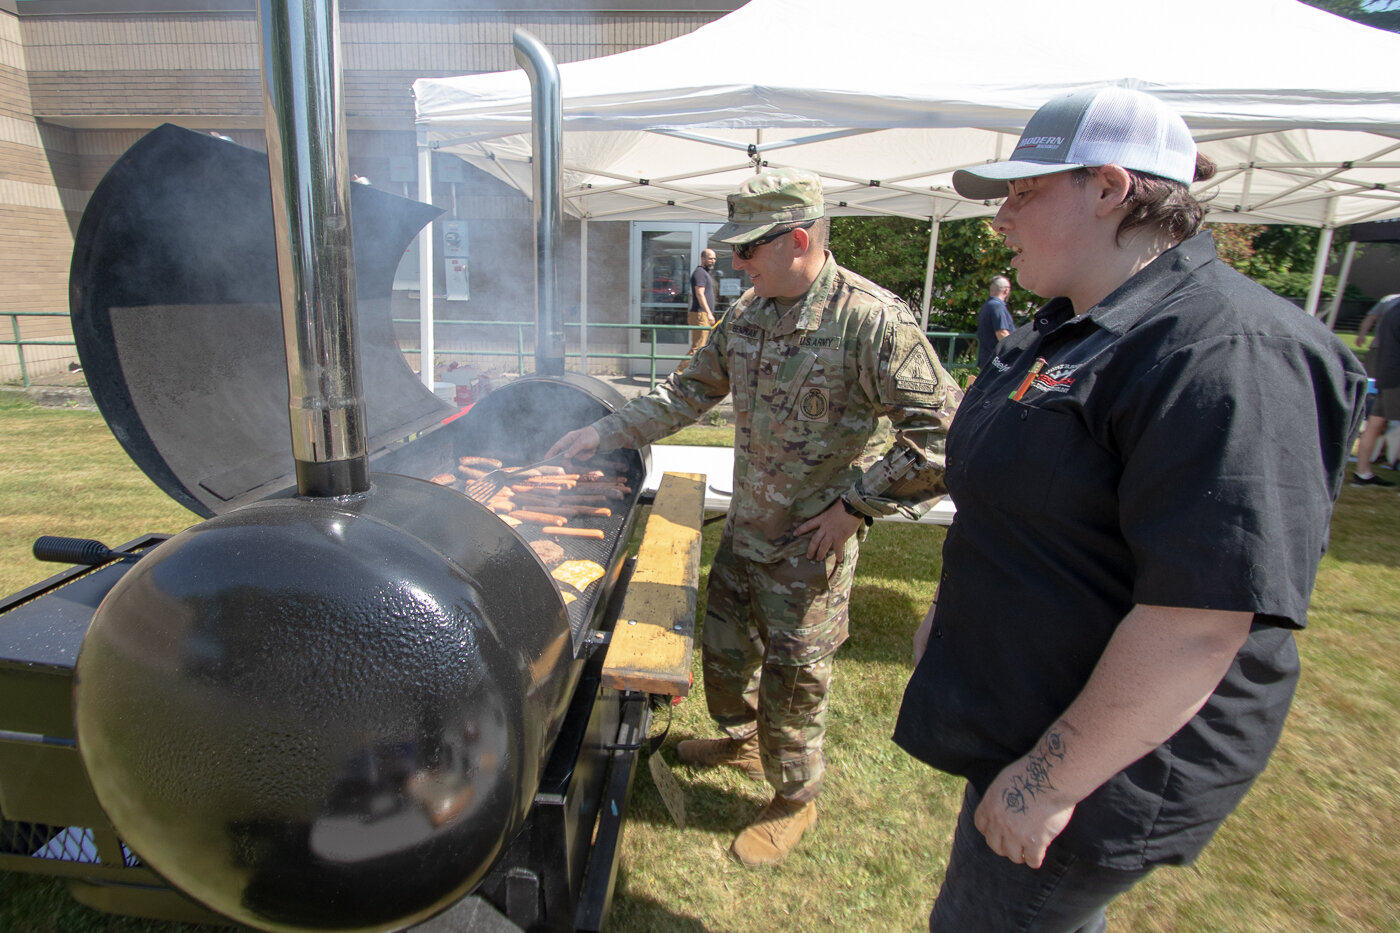 Washington Army National Guard Staff Sergeant James Benham works the grill alongside Raelynn Kuljis, Centralia College diesel tech program member and U.S. Air Force veteran, at a BBQ following the college's Memorial Day ceremony on Thursday.